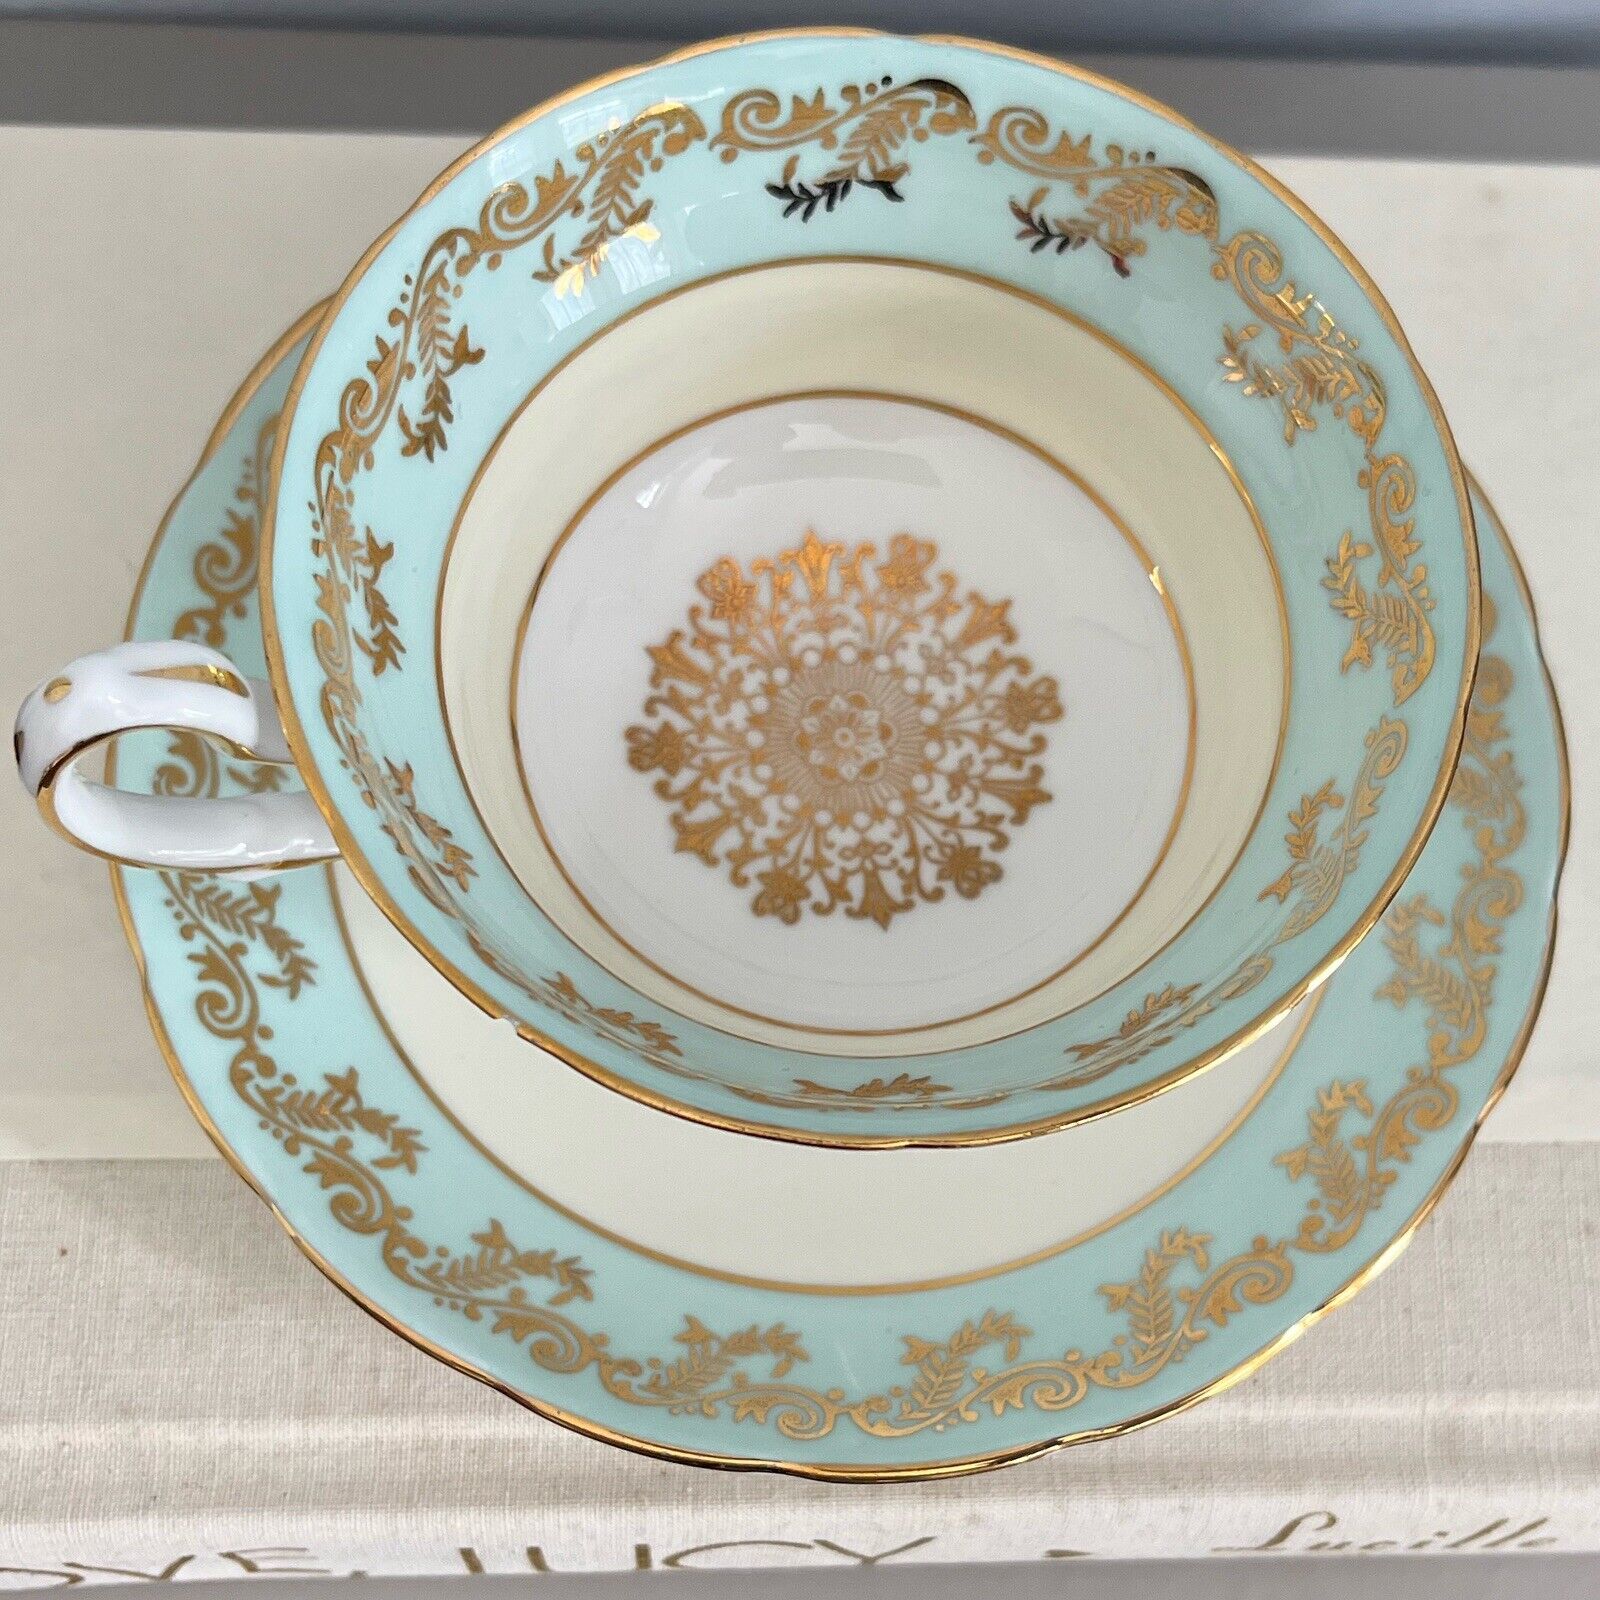 Grosvenor Bone China Teacup And Saucer With Sky Blue Band And Gold Gilding B318